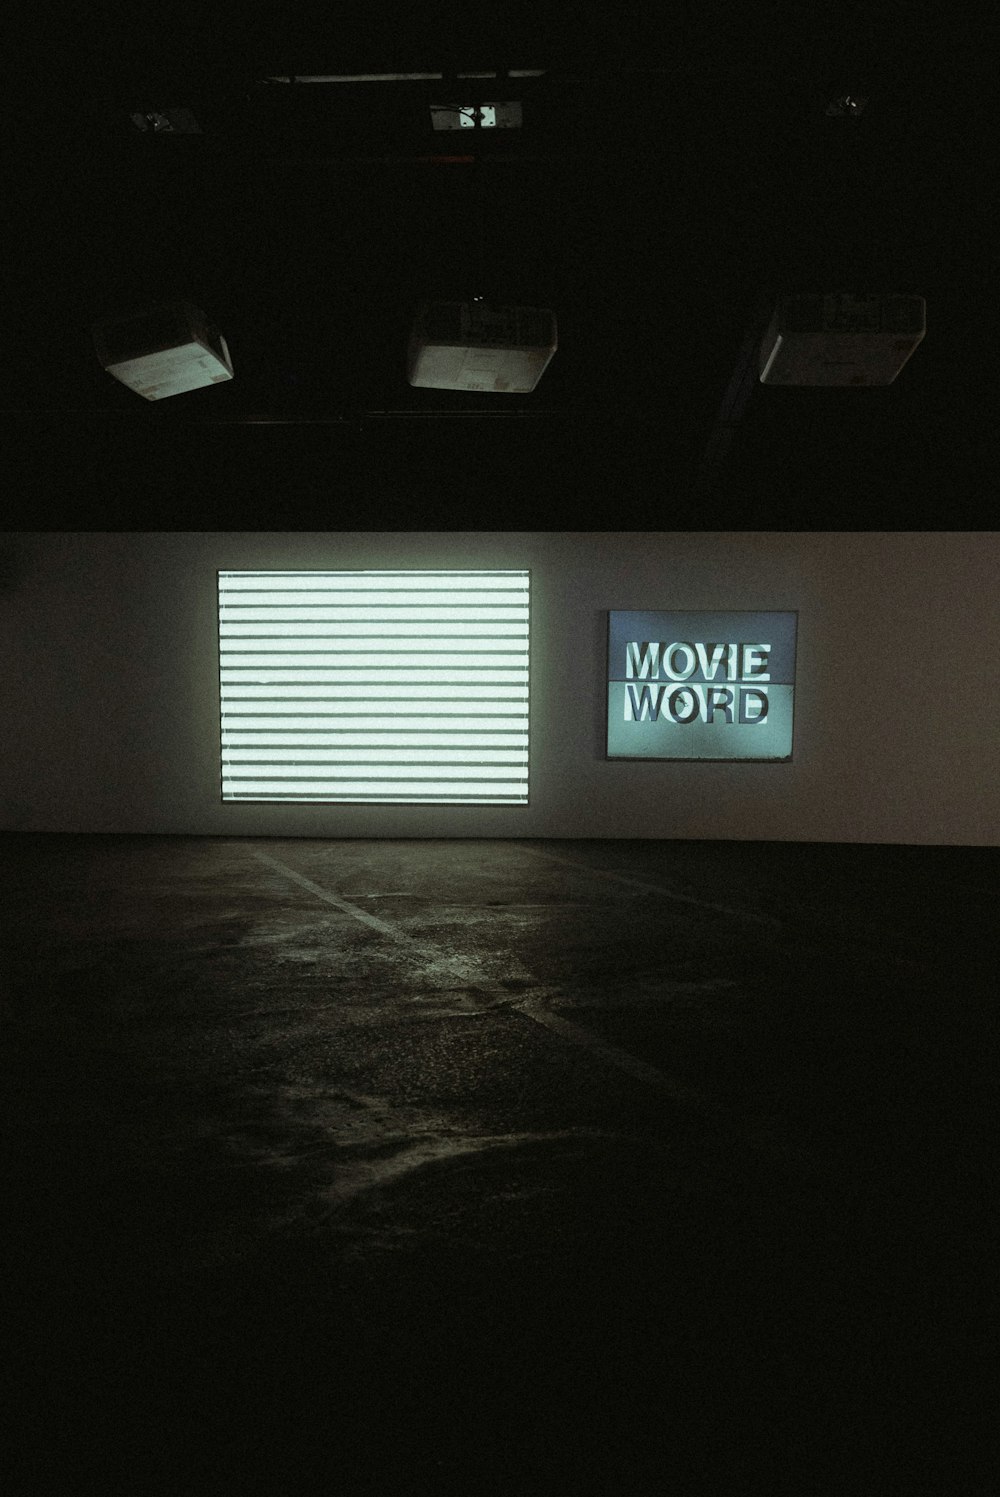 a dark room with a movie word projected on the wall